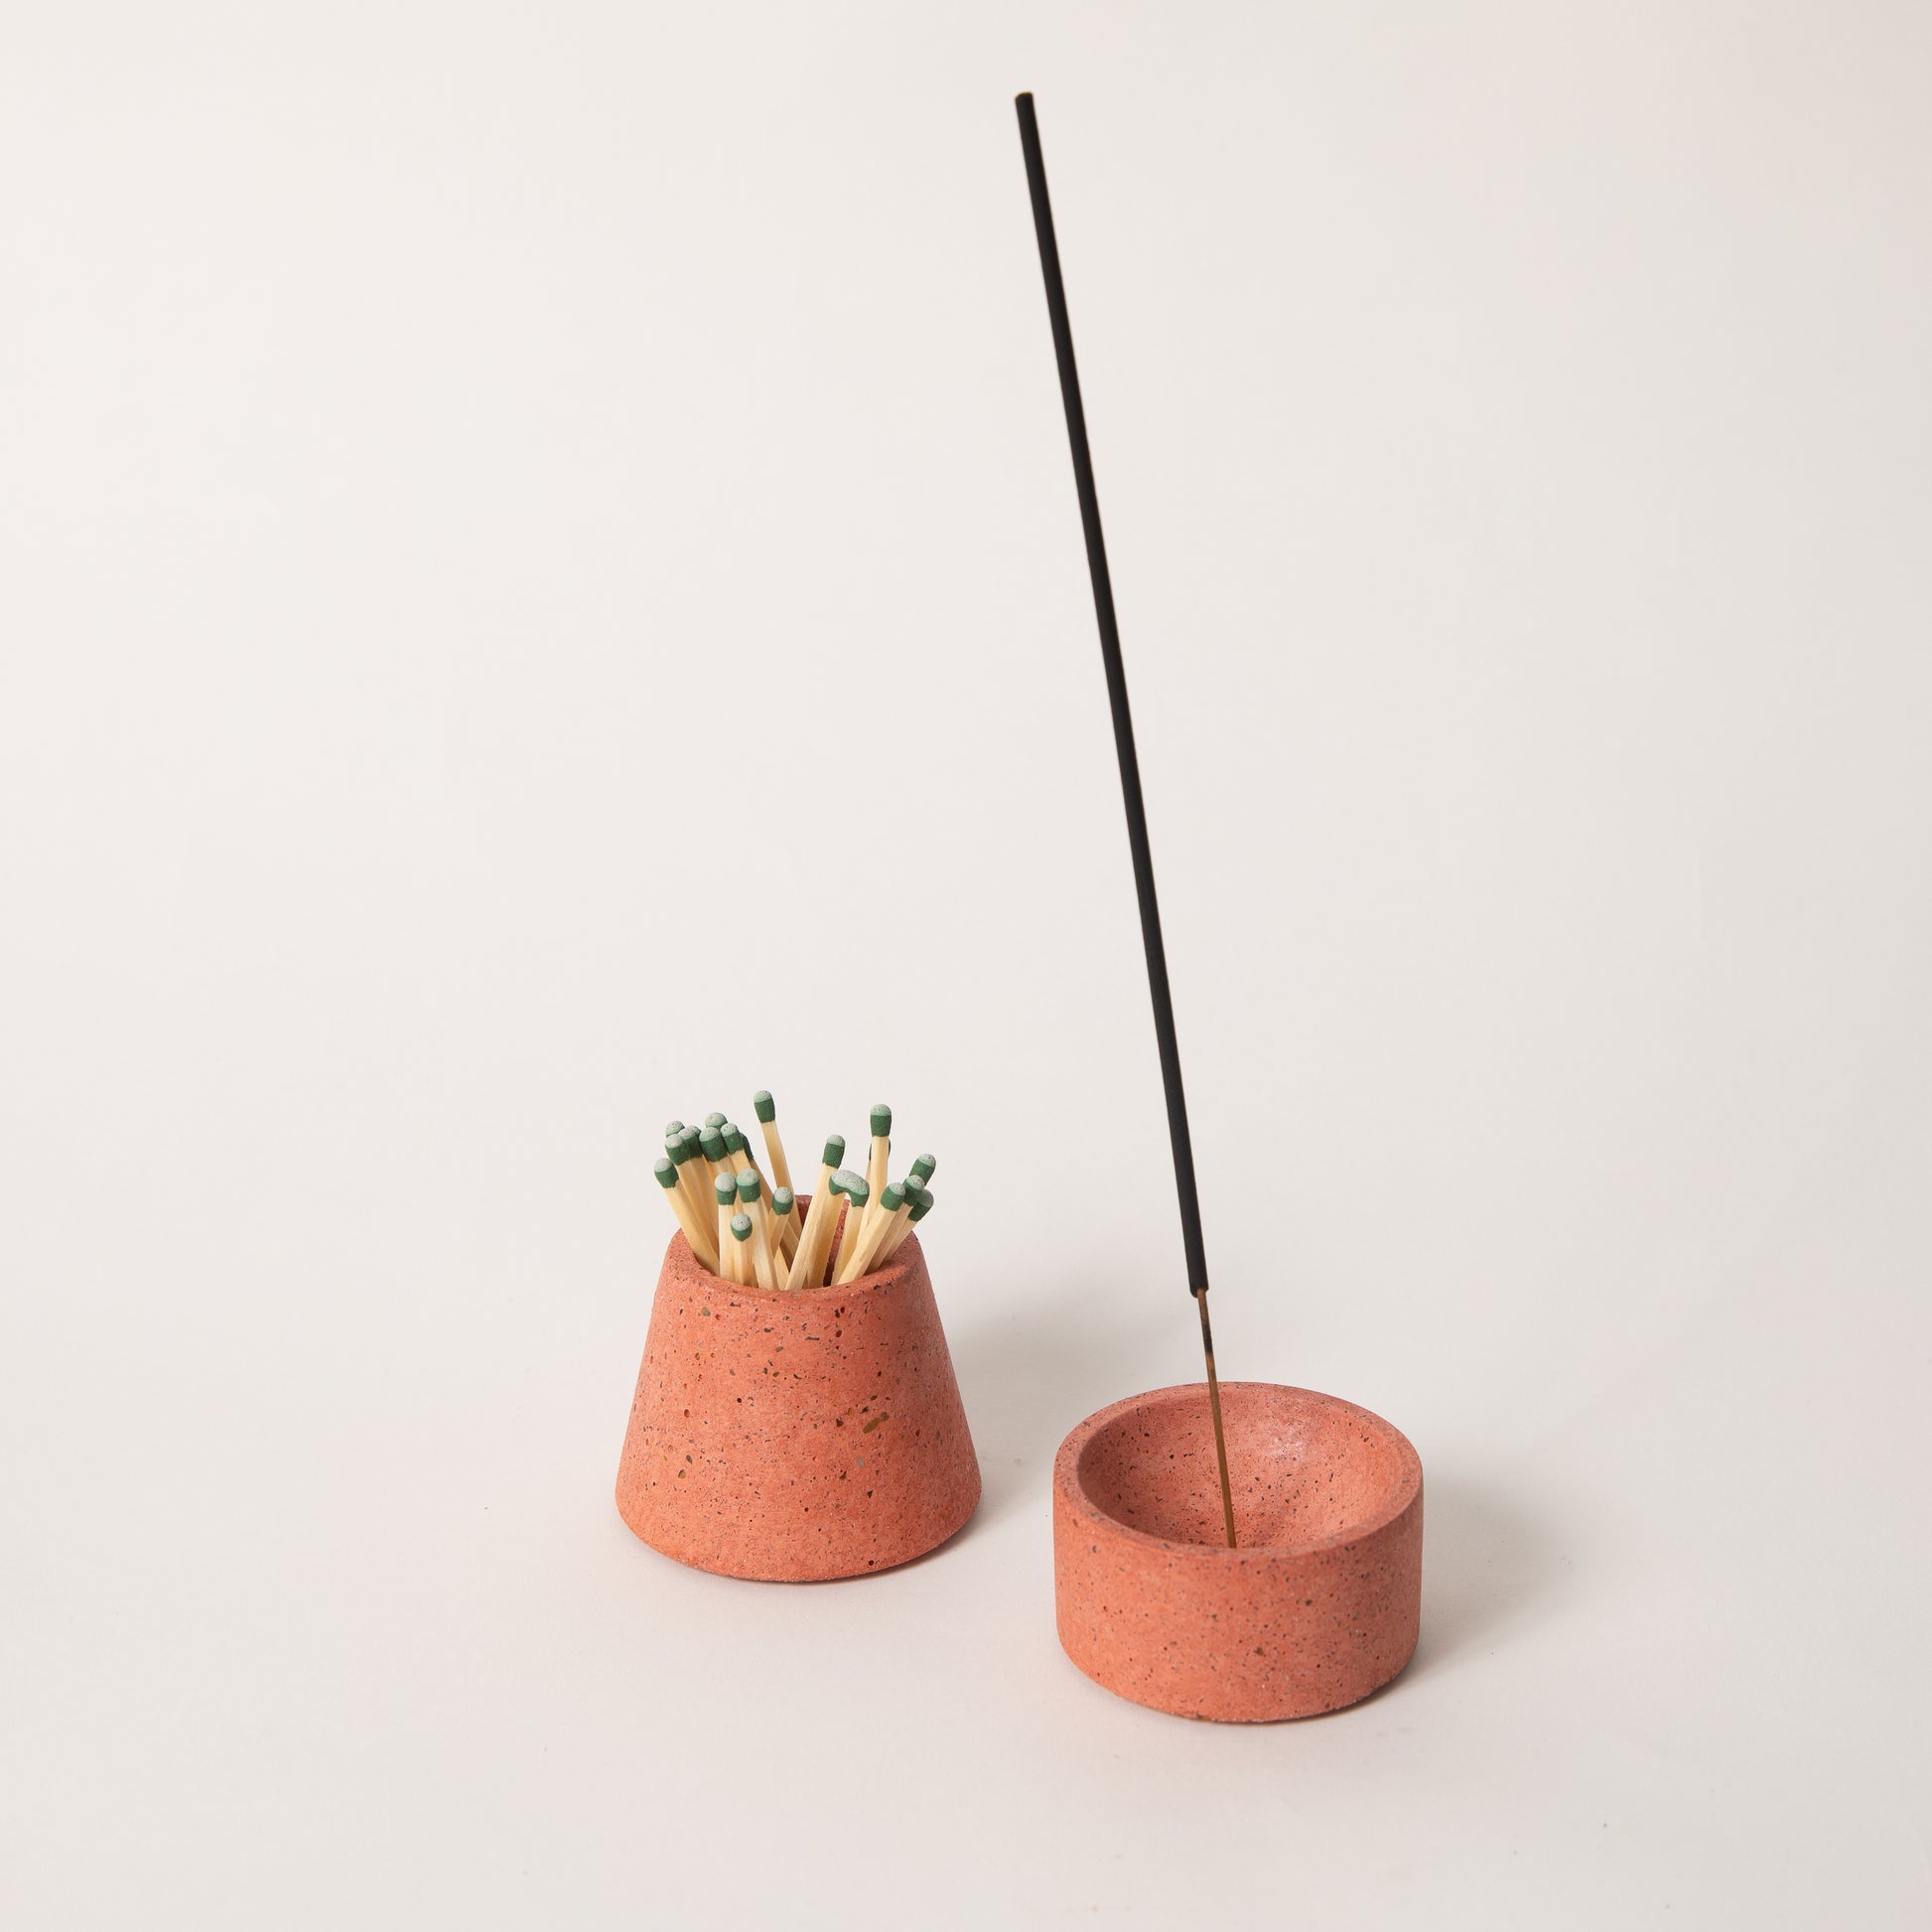 Coral terrazzo matchstick & incense holder set, styled with strike-anywhere matches & an incense stick.